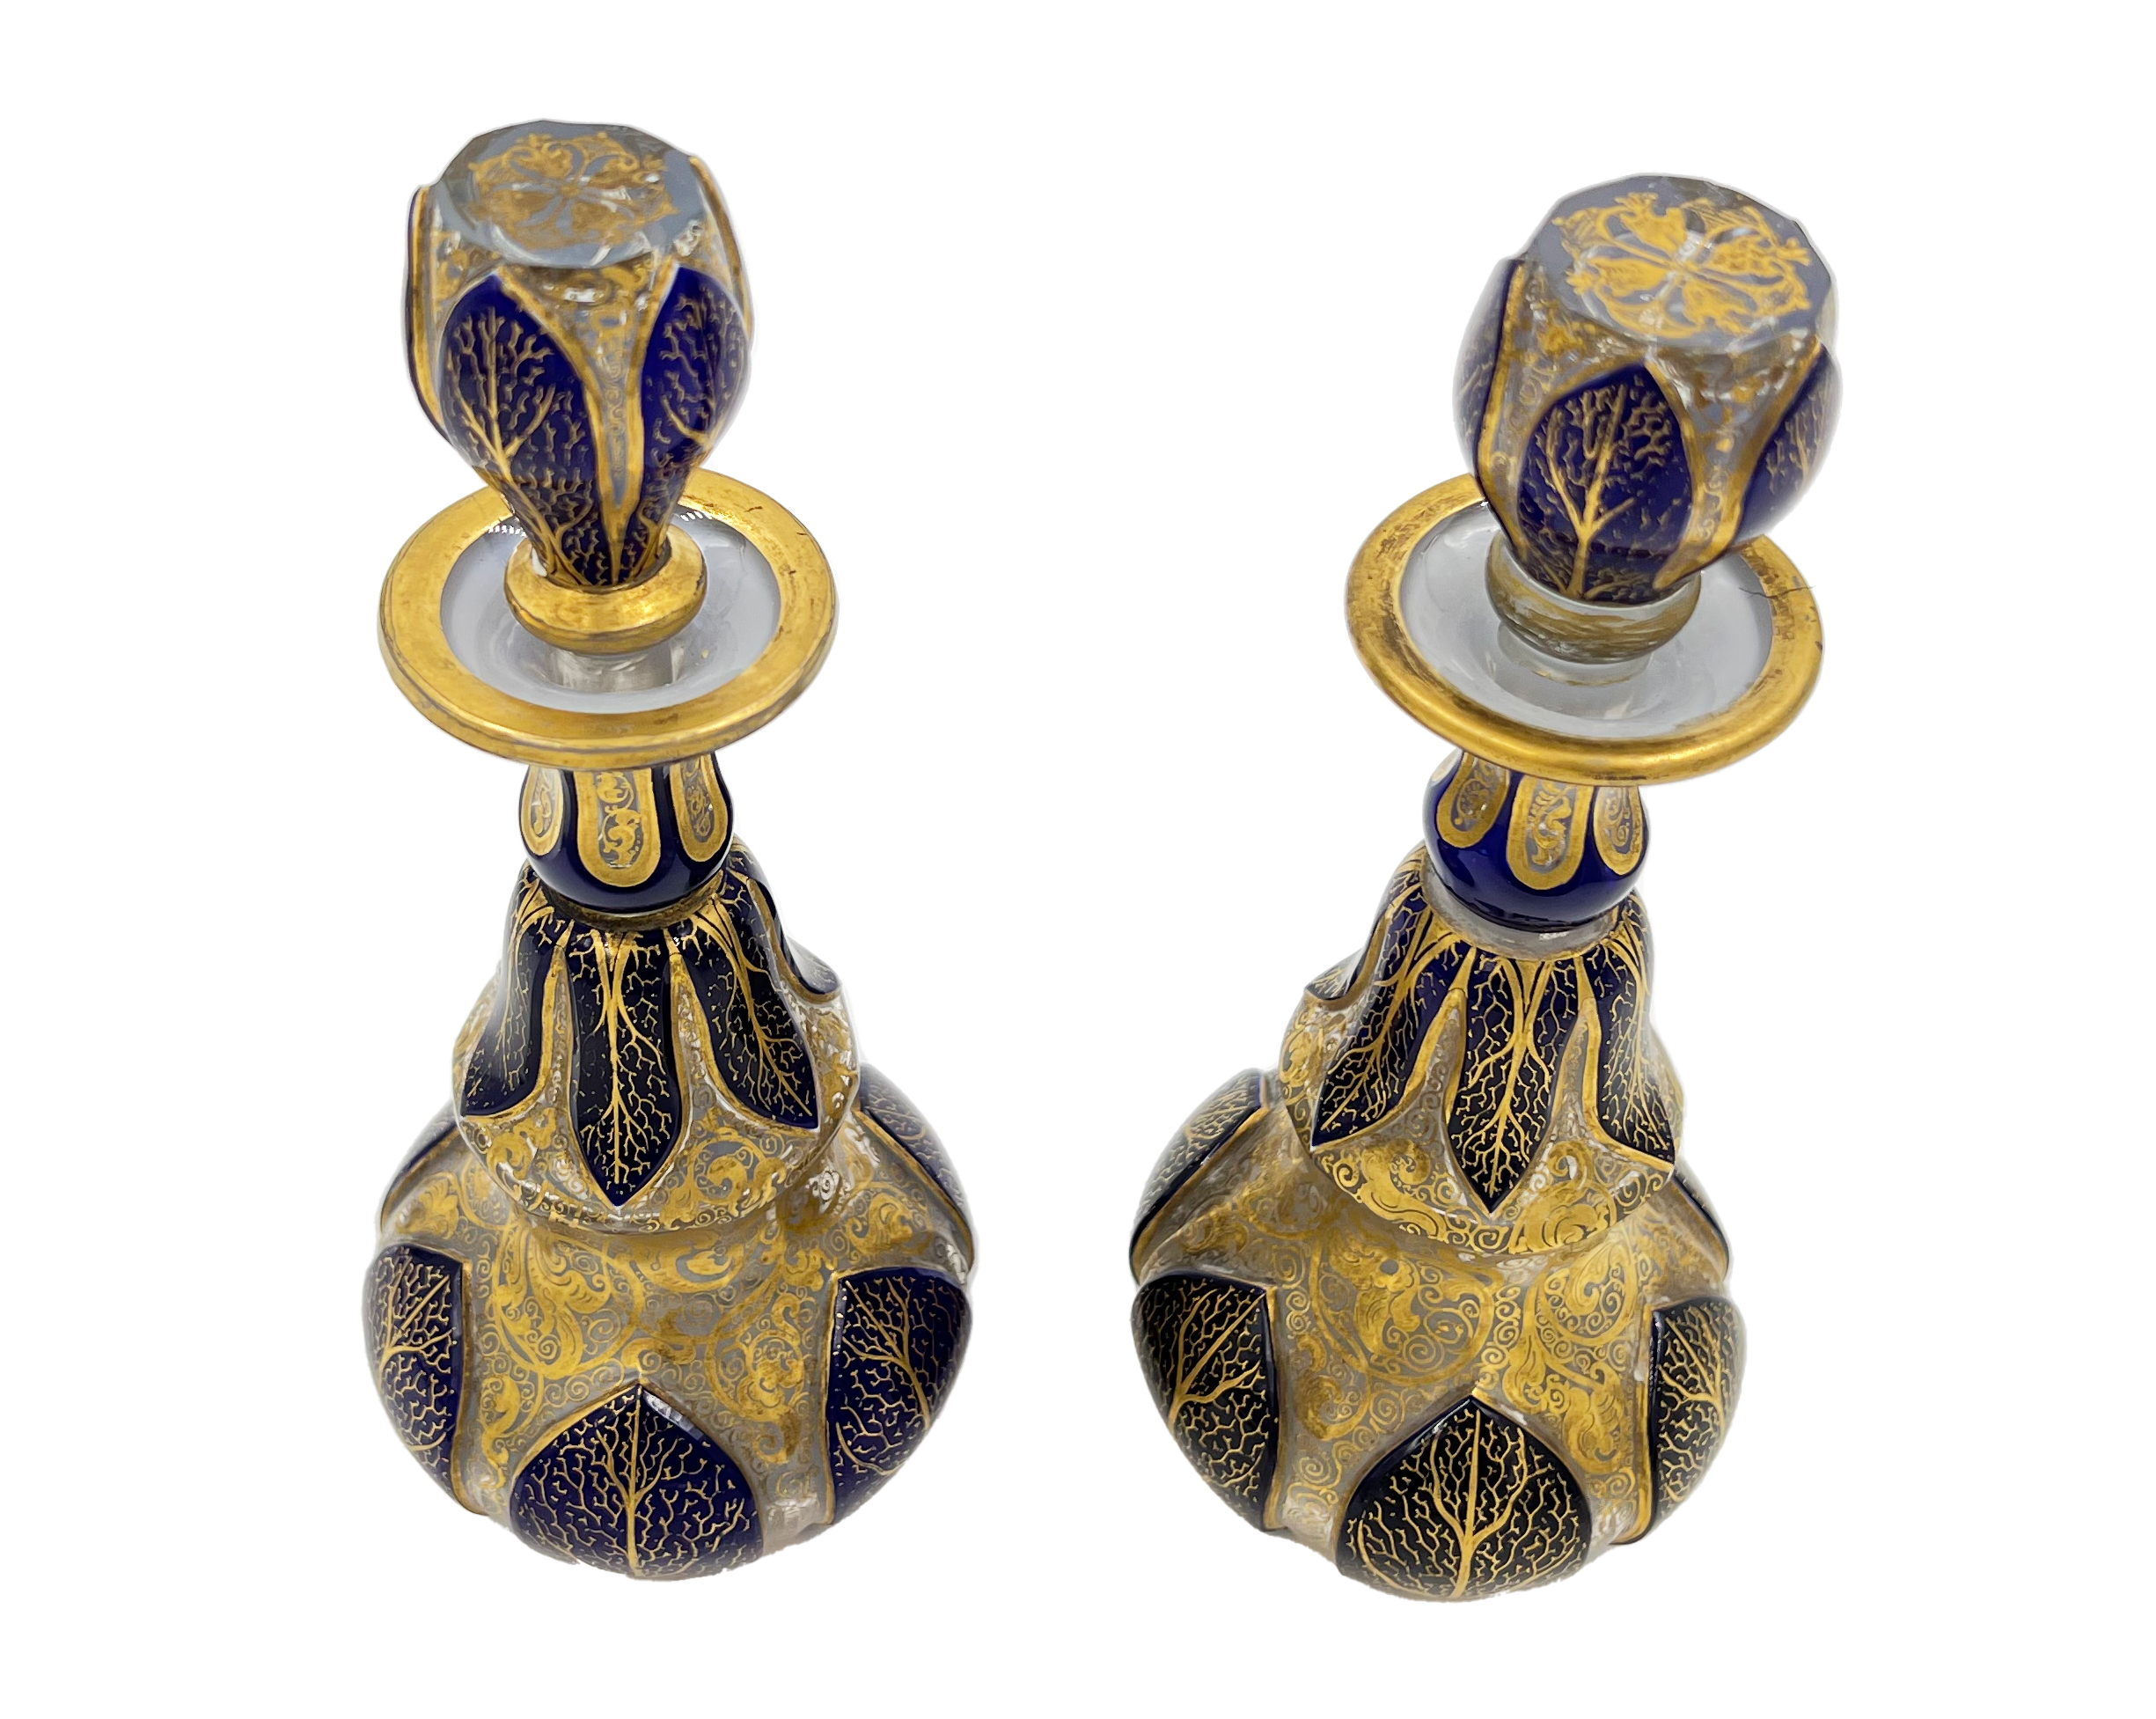 TWO BOHEMIAN GLASS PERFUME BOTTLES WITH BLUE AND GOLD GILDING - Image 2 of 2